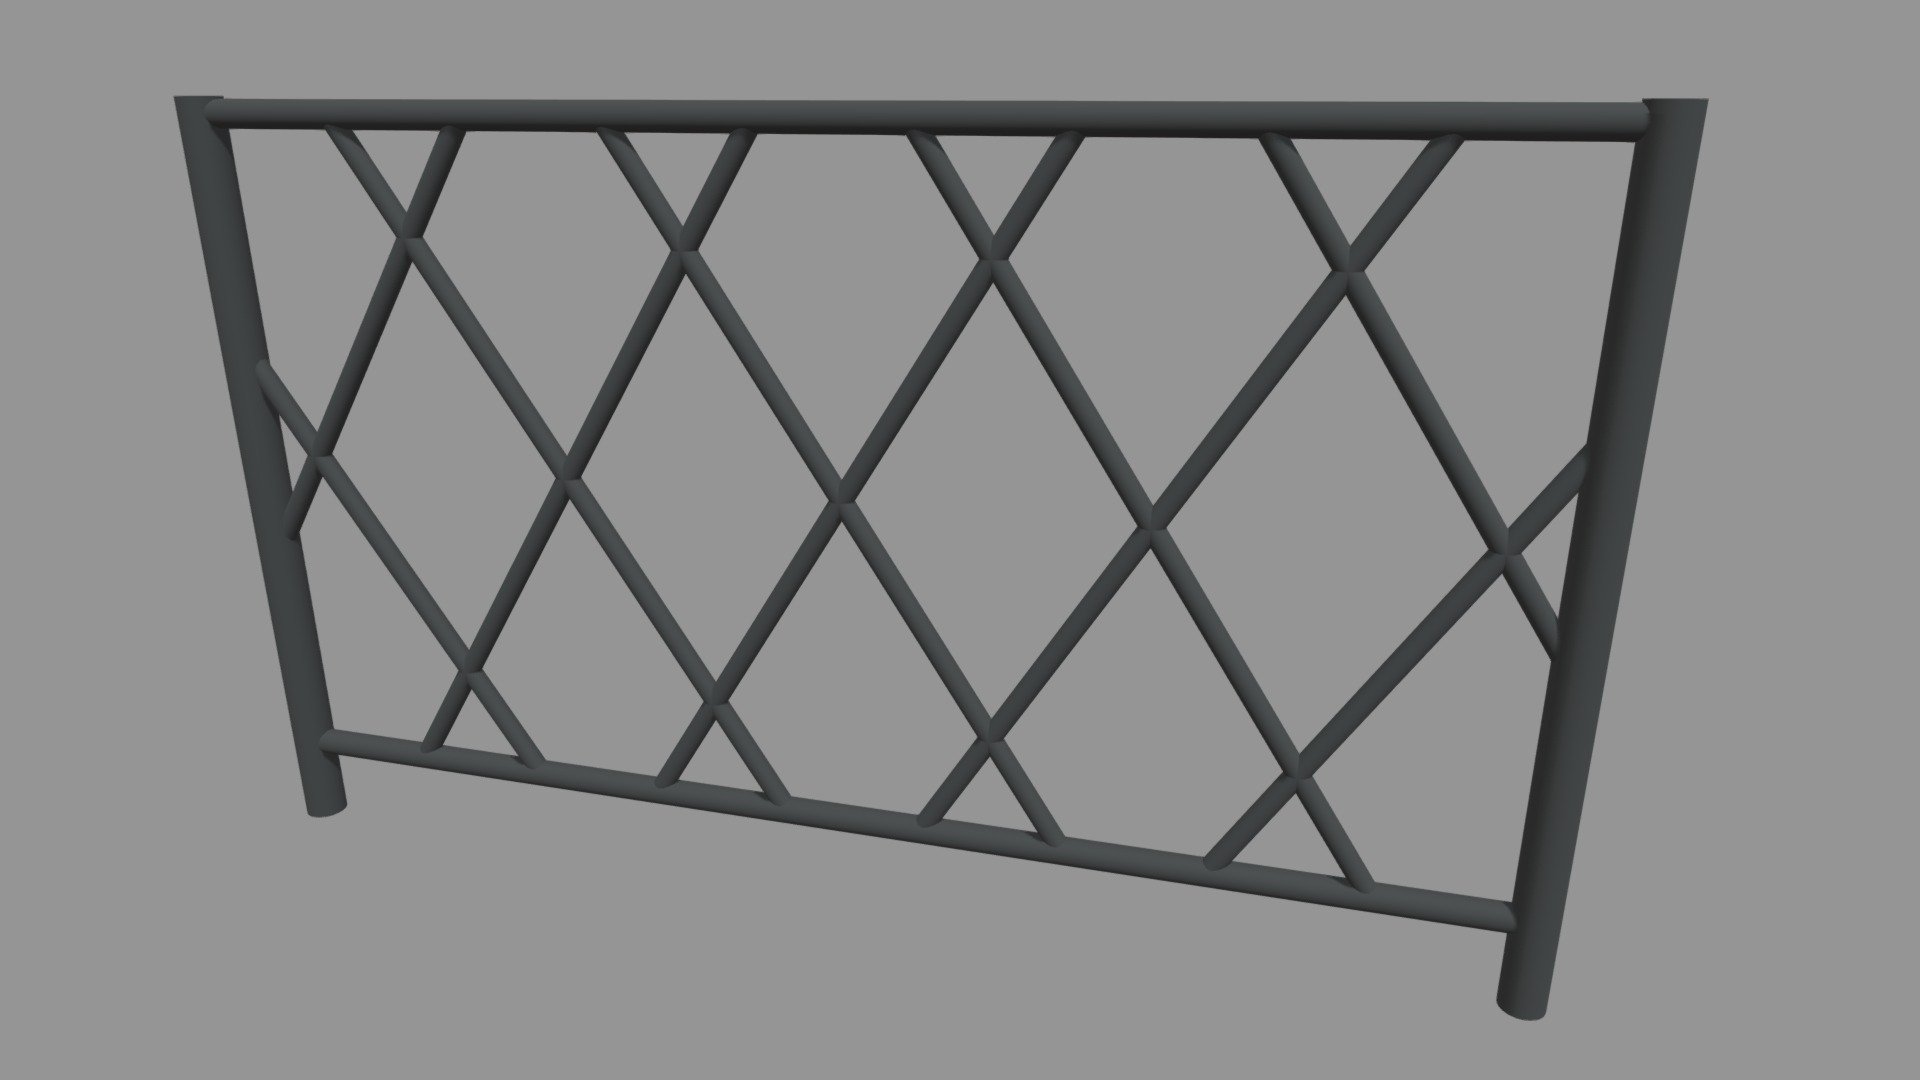 This model contains a Fence 03 based on real city fence which i modeled in Maya 2018. There is one unique material, a black material with one unique UV.

These models will be part of a huge city elements pack which will be added as a big pack and separately on my profile.

If you need any kind of help contact me, i will help you with everything i can. If you like the model please give me some feedback, I would appreciate it.

Don’t doubt on contacting me, i would be very happy to help. If you experience any kind of difficulties, be sure to contact me and i will help you. Sincerely Yours, ViperJr3D - Fence 03 - Buy Royalty Free 3D model by ViperJr3D 3d model